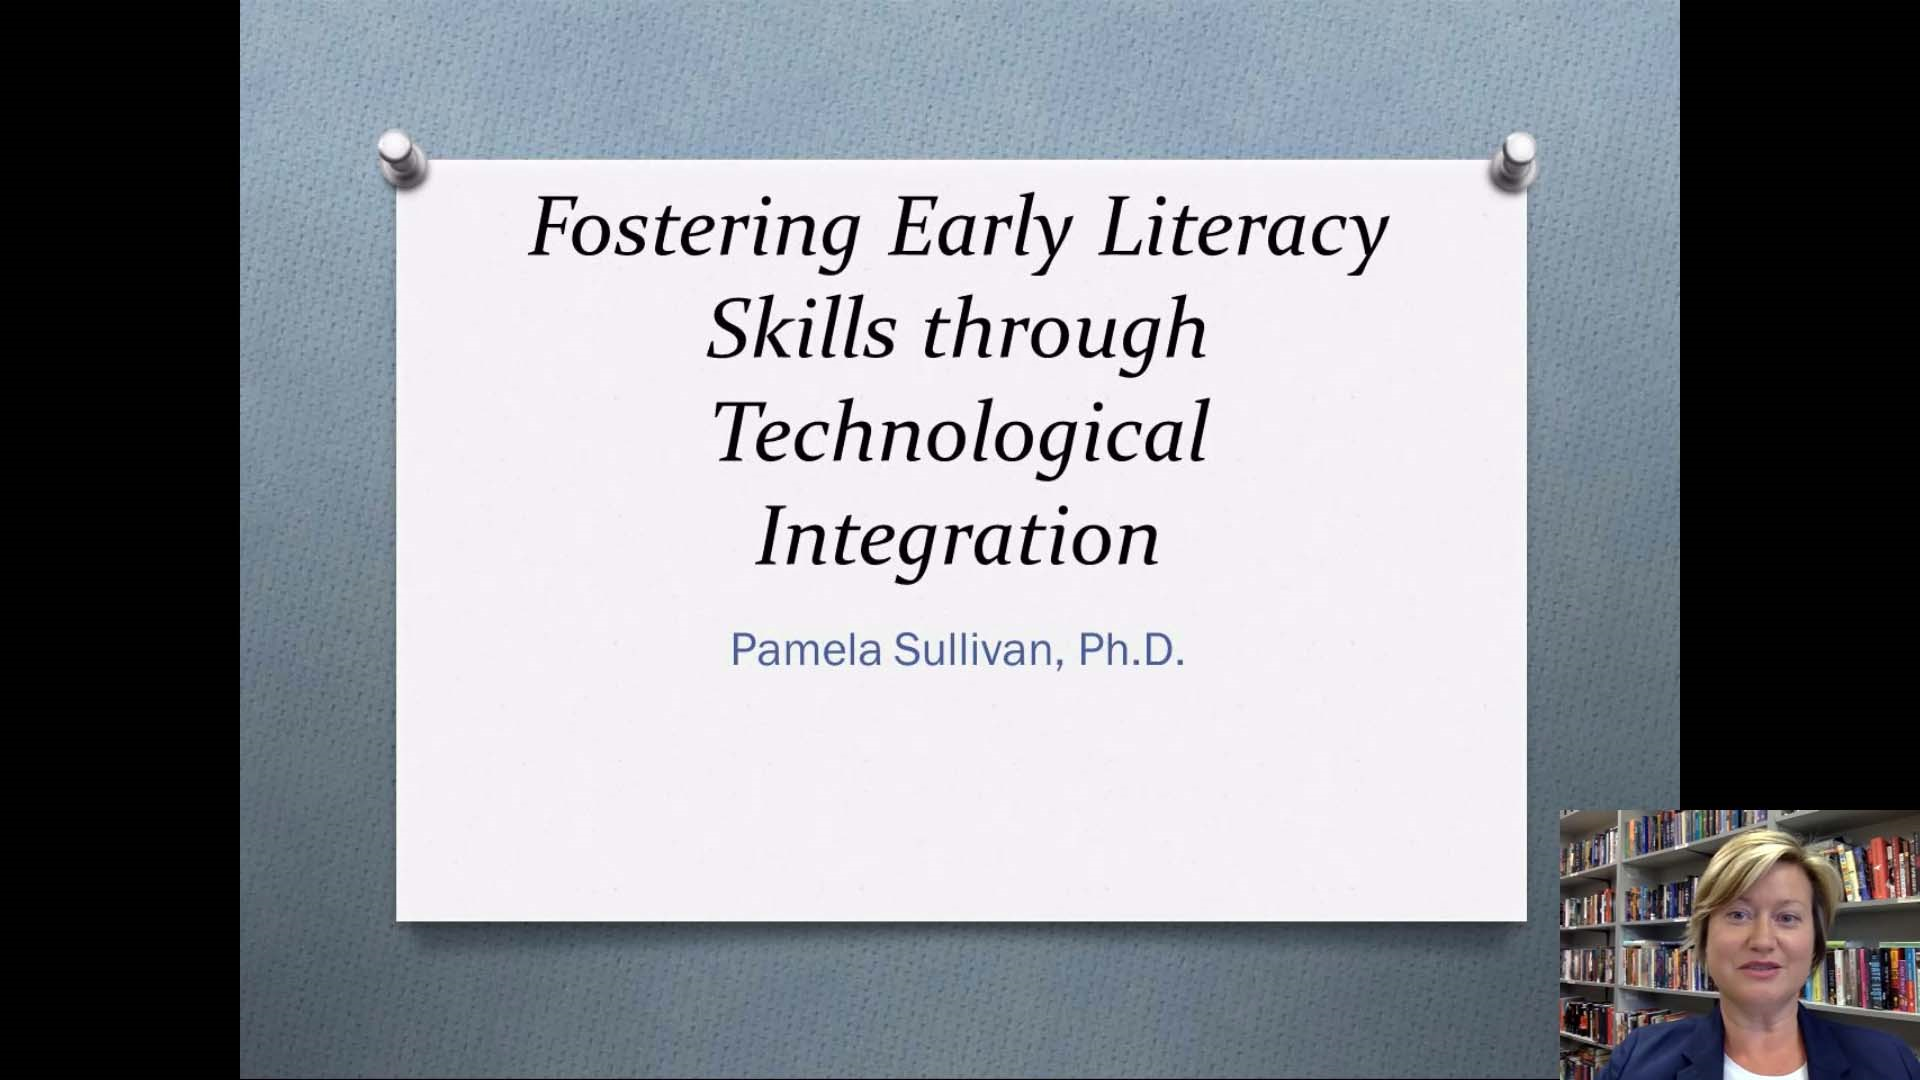 Fostering Early Literacy Skills through Technological Integration